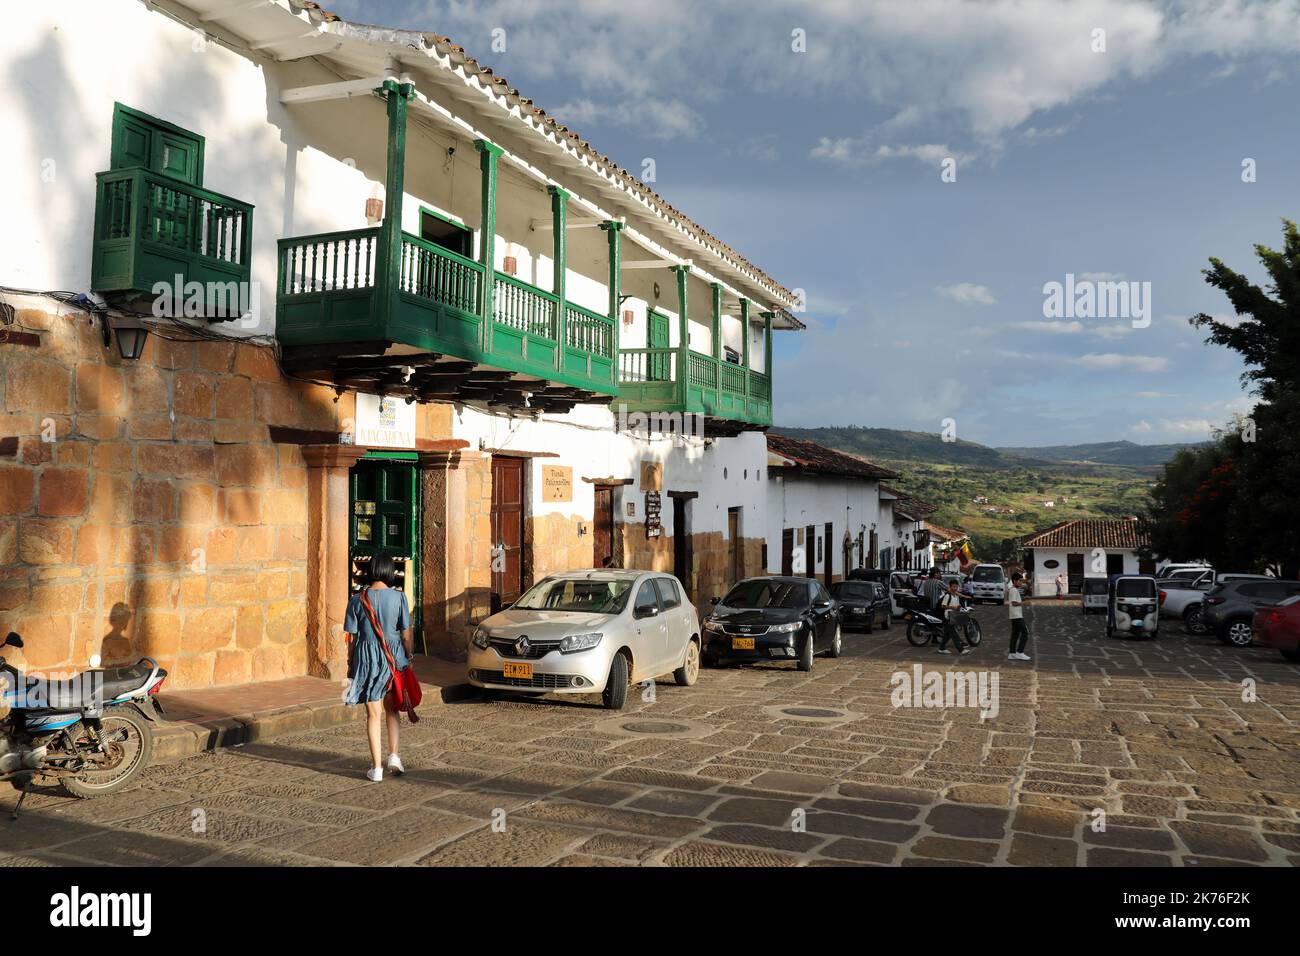 Colonial architecture at the Colombian town of Barichara Stock Photo